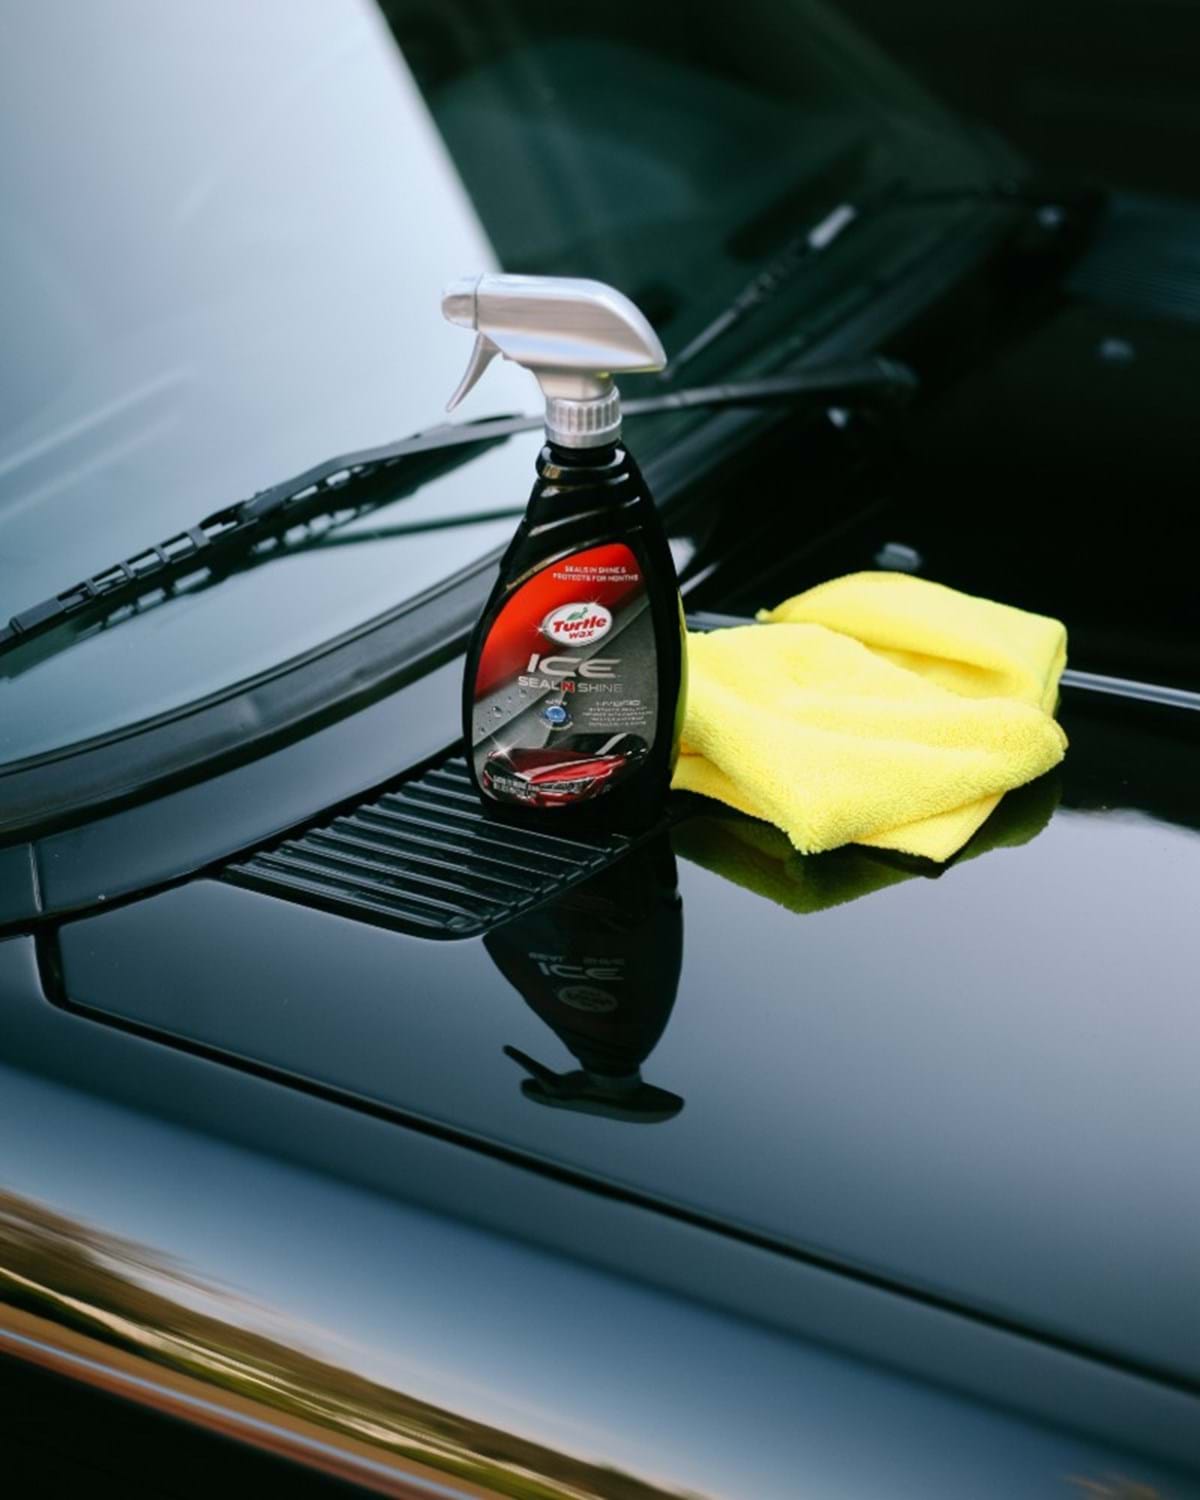 Auto Detailing: Why and When